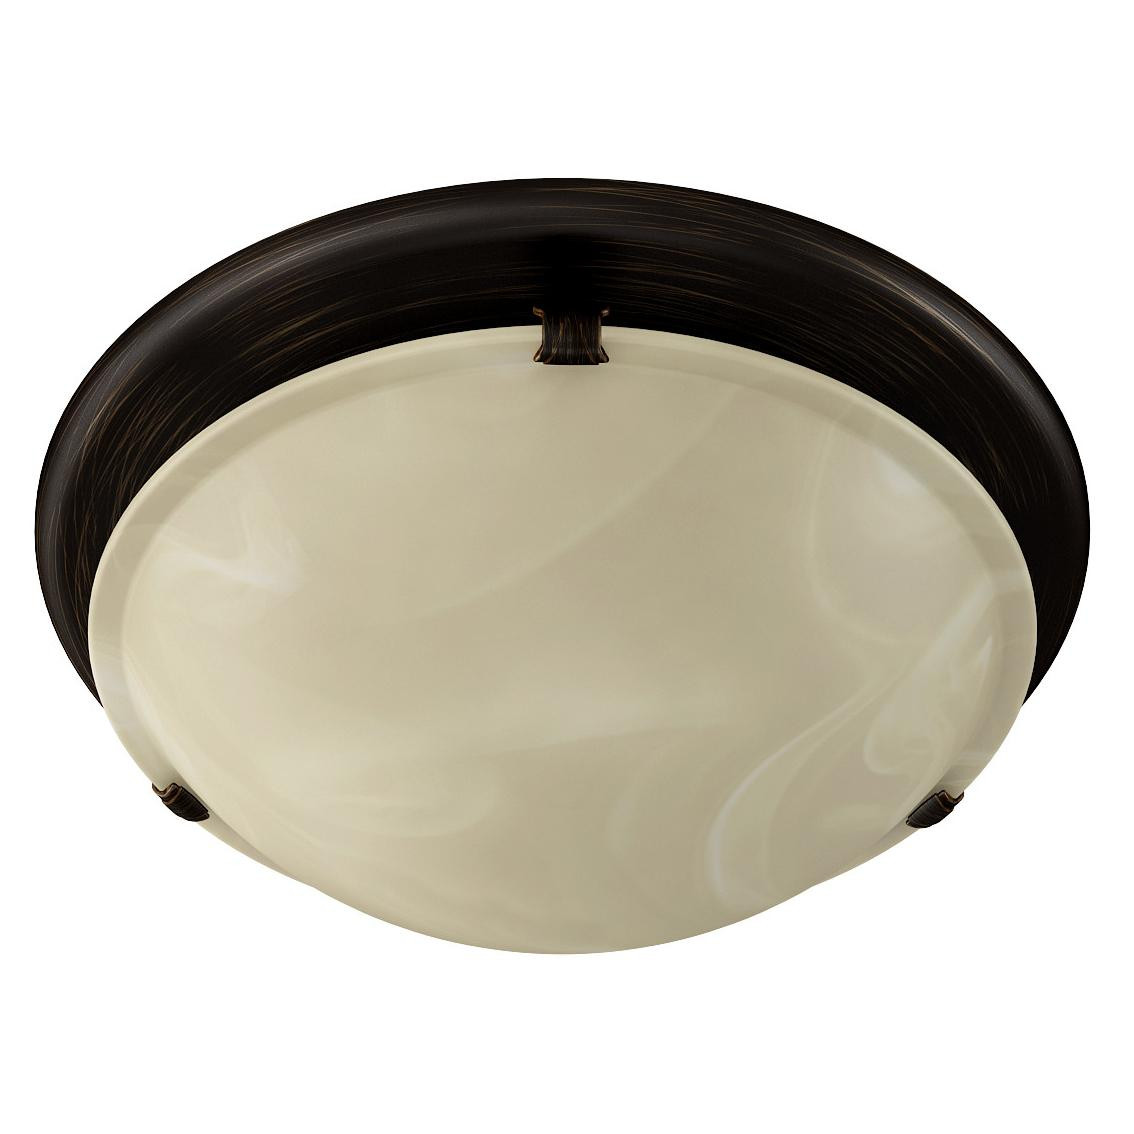 Bronze Bathroom Fan With Light
 Broan NuTone 761RB Round Fan and Light bo for Bathroom